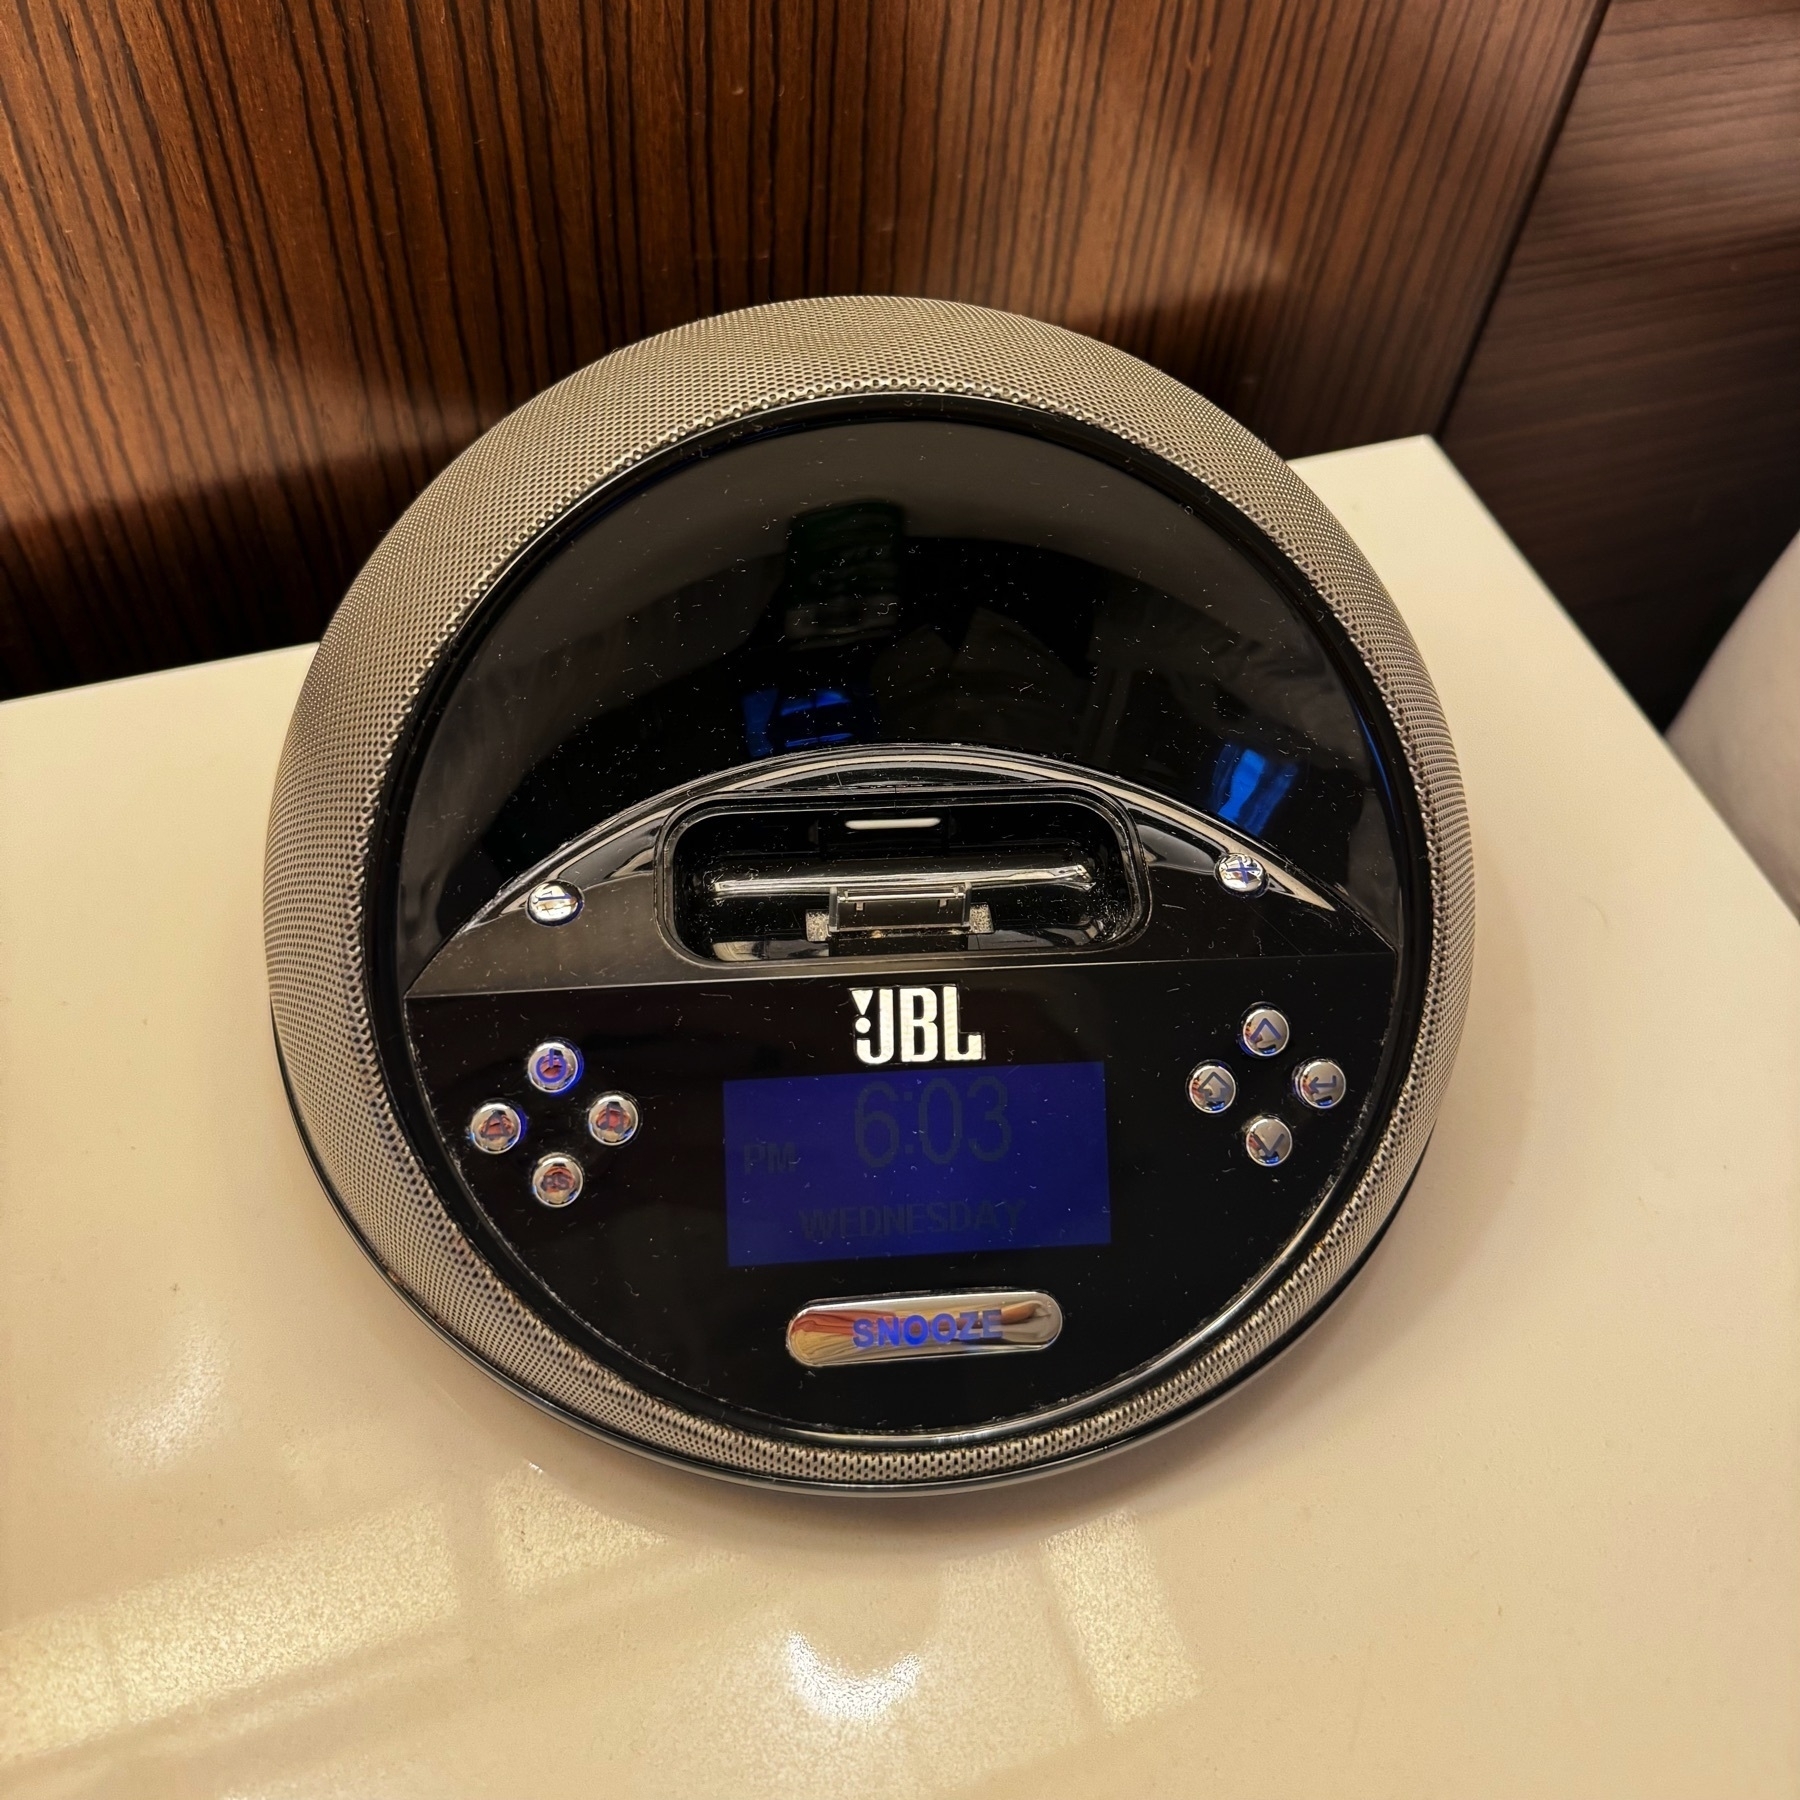 A JBL alarm clock and speaker with an iPod 30-pin connector. It’s circular on a white table with a glossy wood panel in the background.